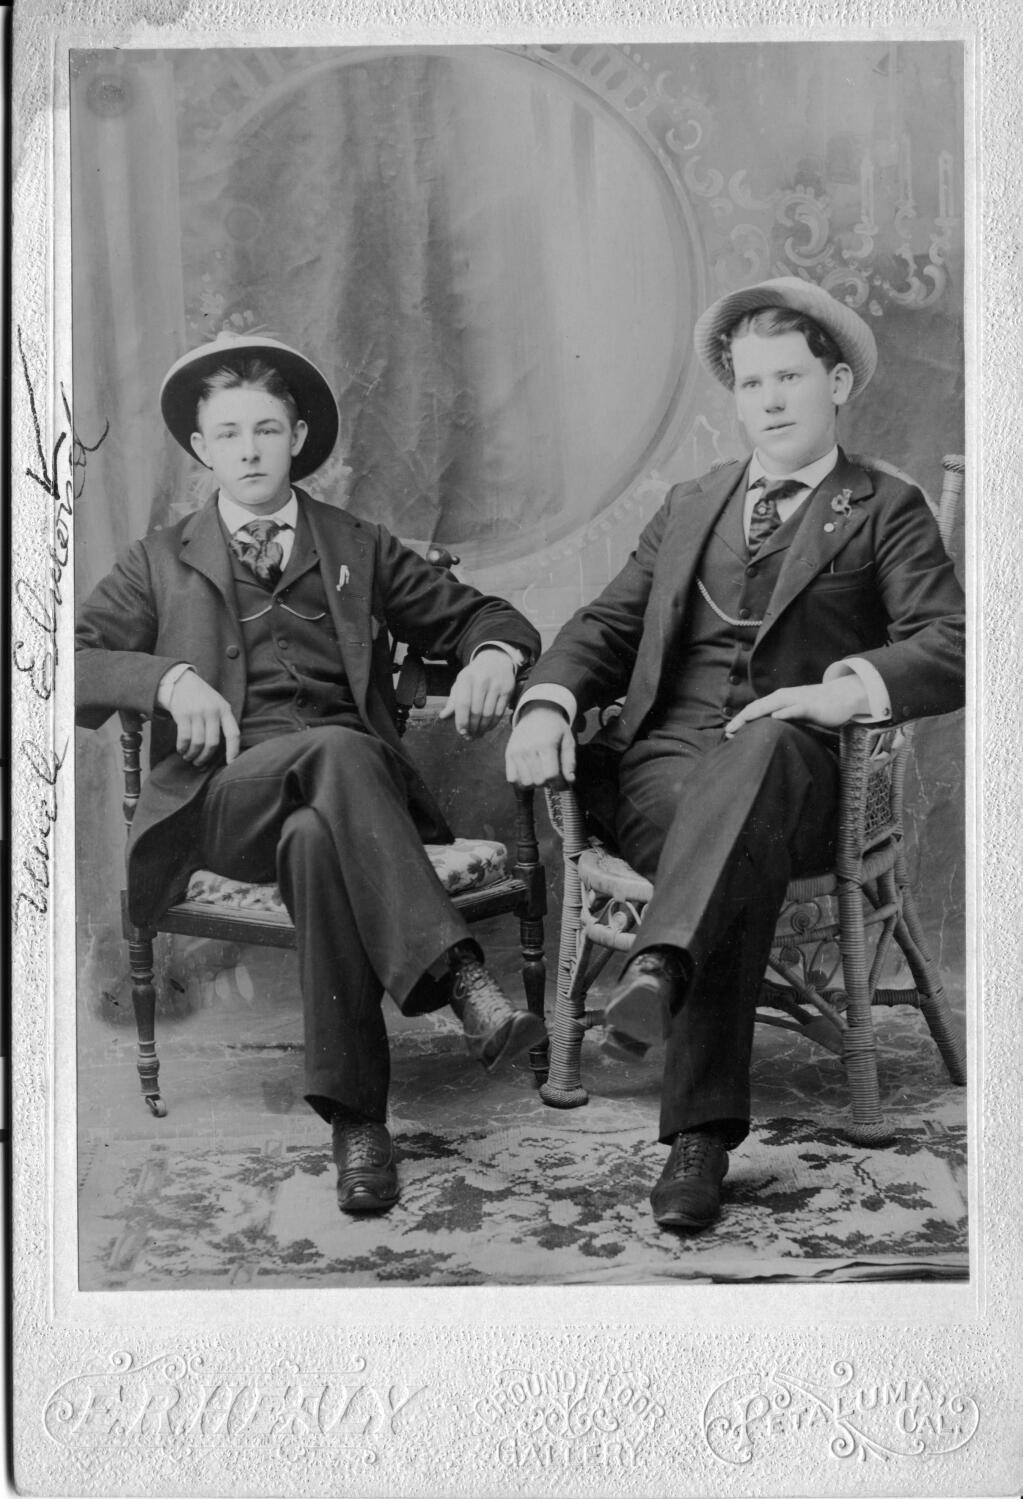 A cabinet card of Edmond Sterling Haskins and an unidentified man. (Photo by Edwin Ruthven Healy, 1890s. Courtesy of the Petaluma Historical Library & Museum)